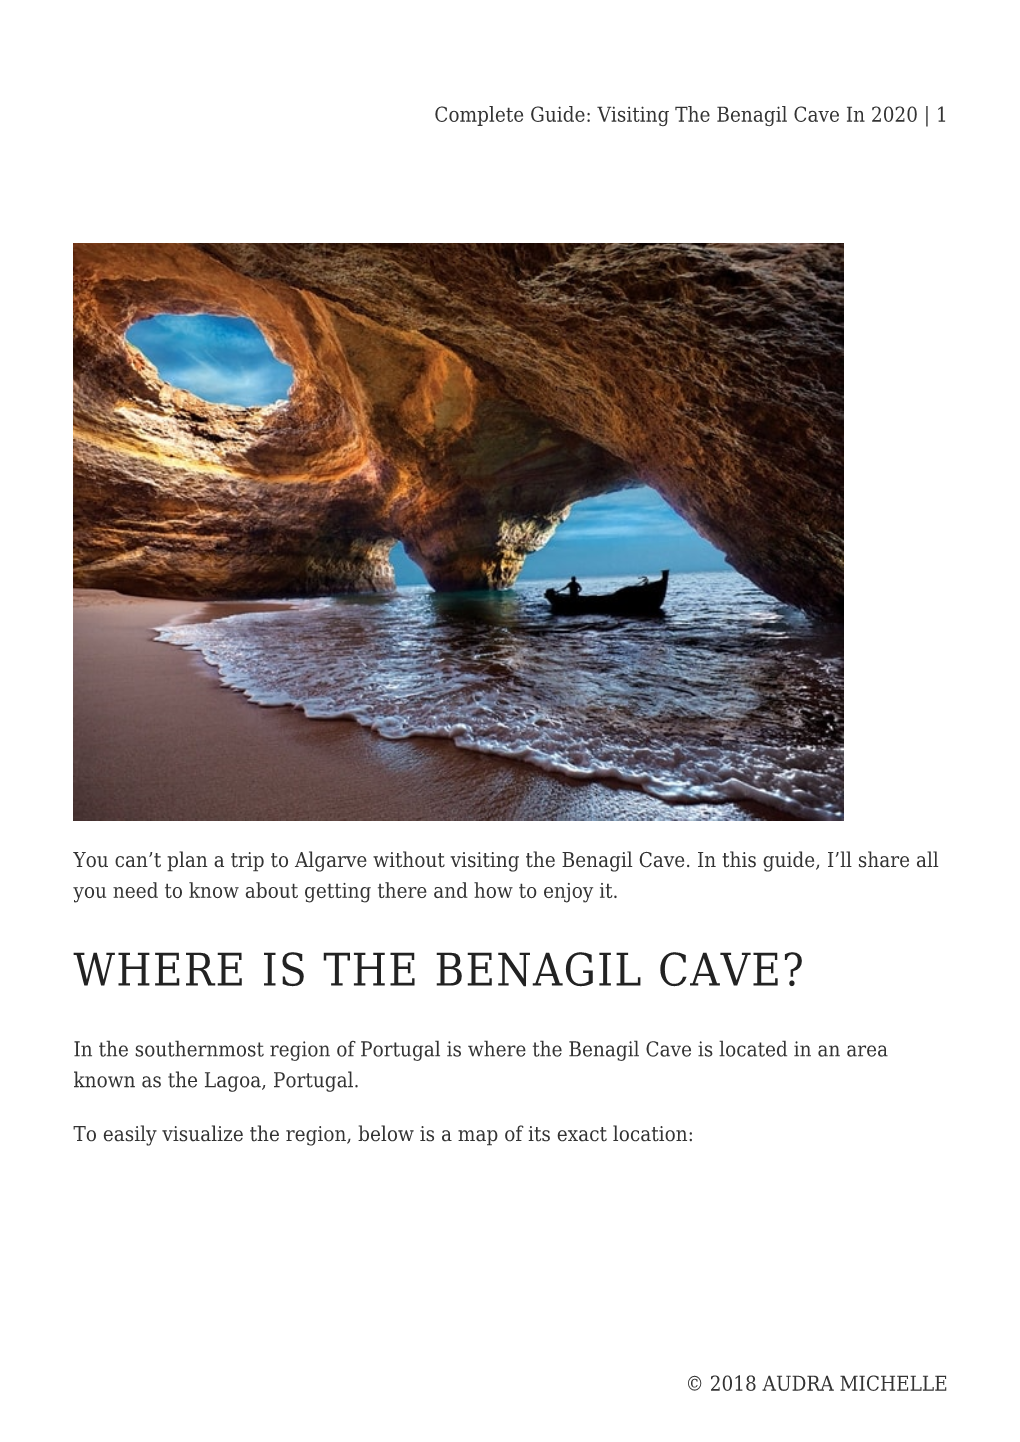 Complete Guide: Visiting the Benagil Cave in 2020 | 1